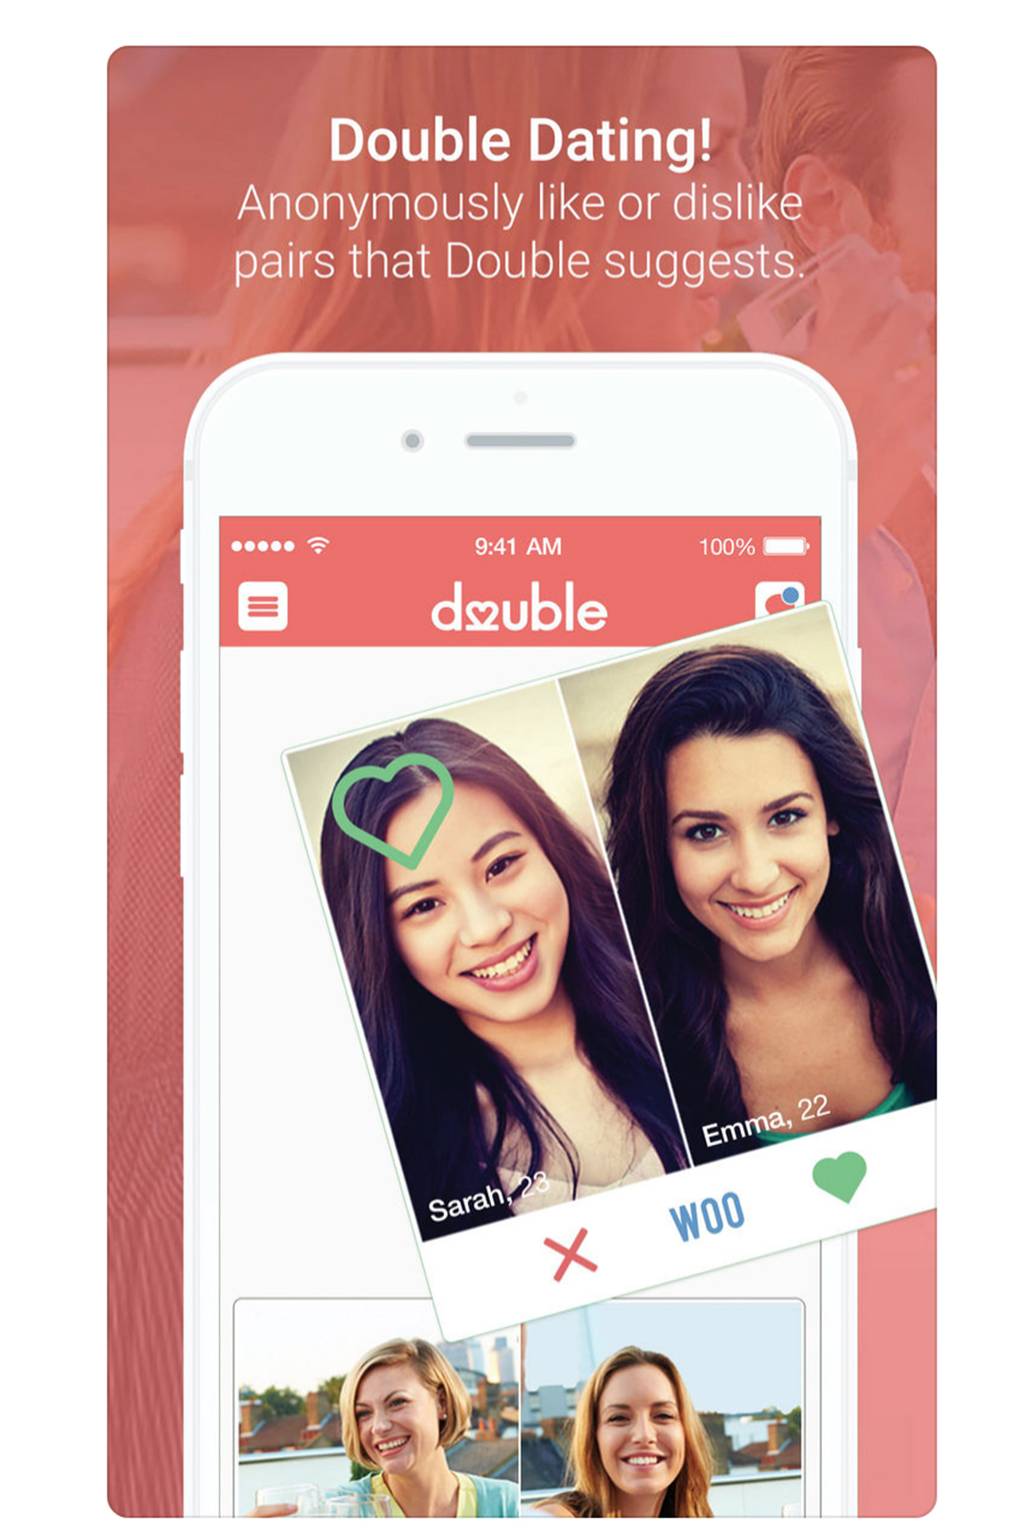 New dating app better than bumble